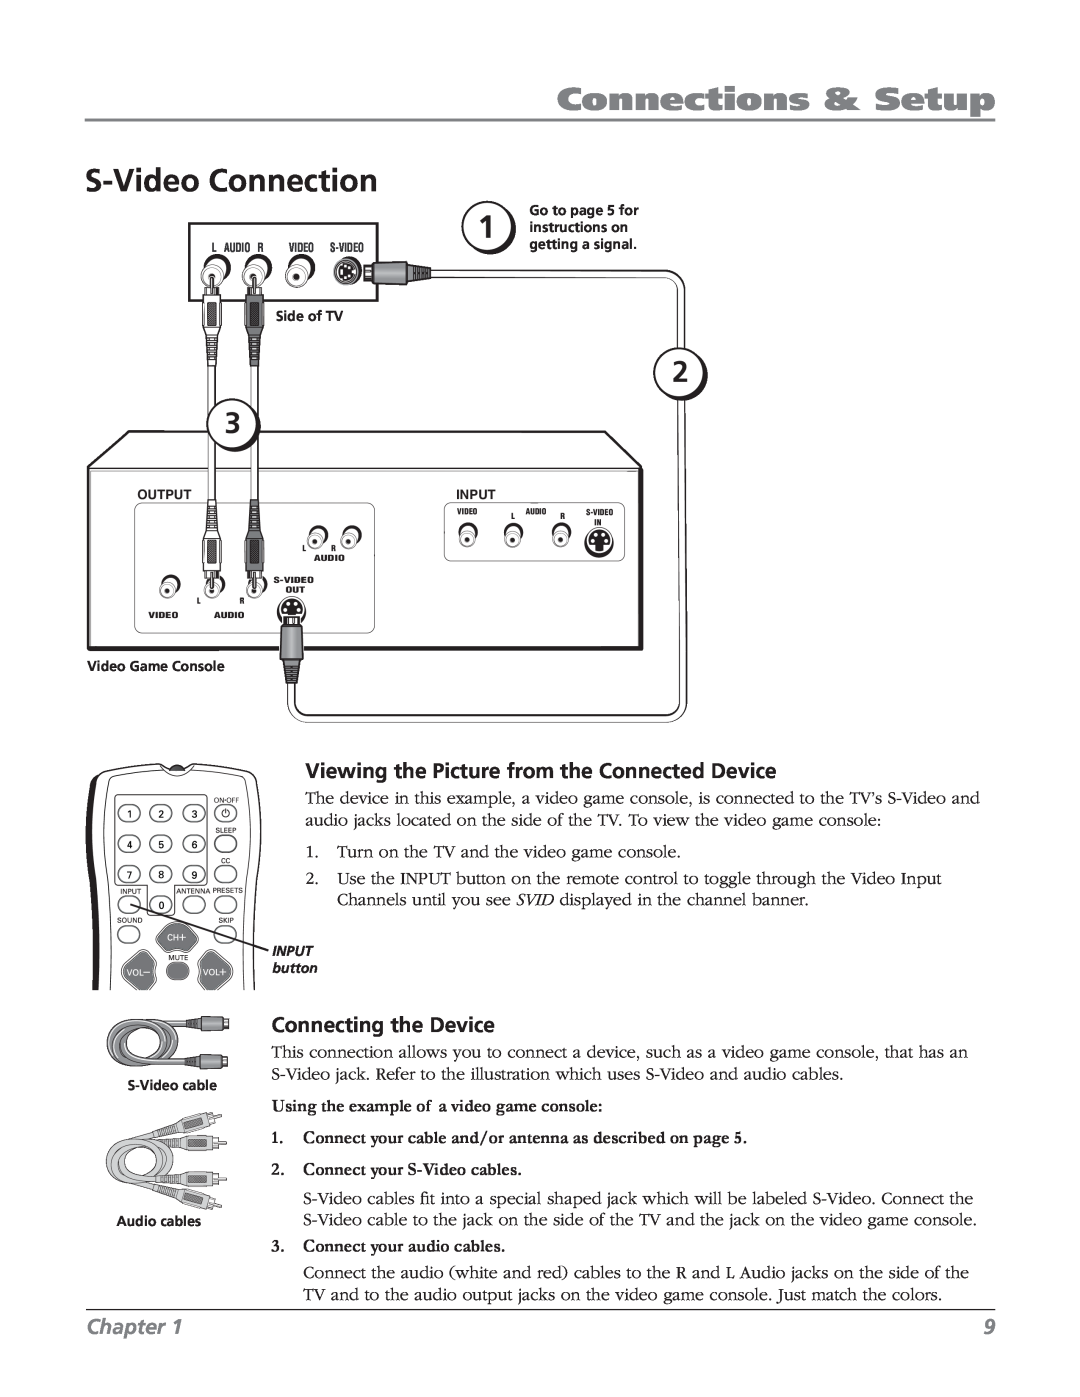 RCA 32v434t, 32V524T S-Video Connection, Using the example of a video game console, Connect your S-Video cables, Chapter 